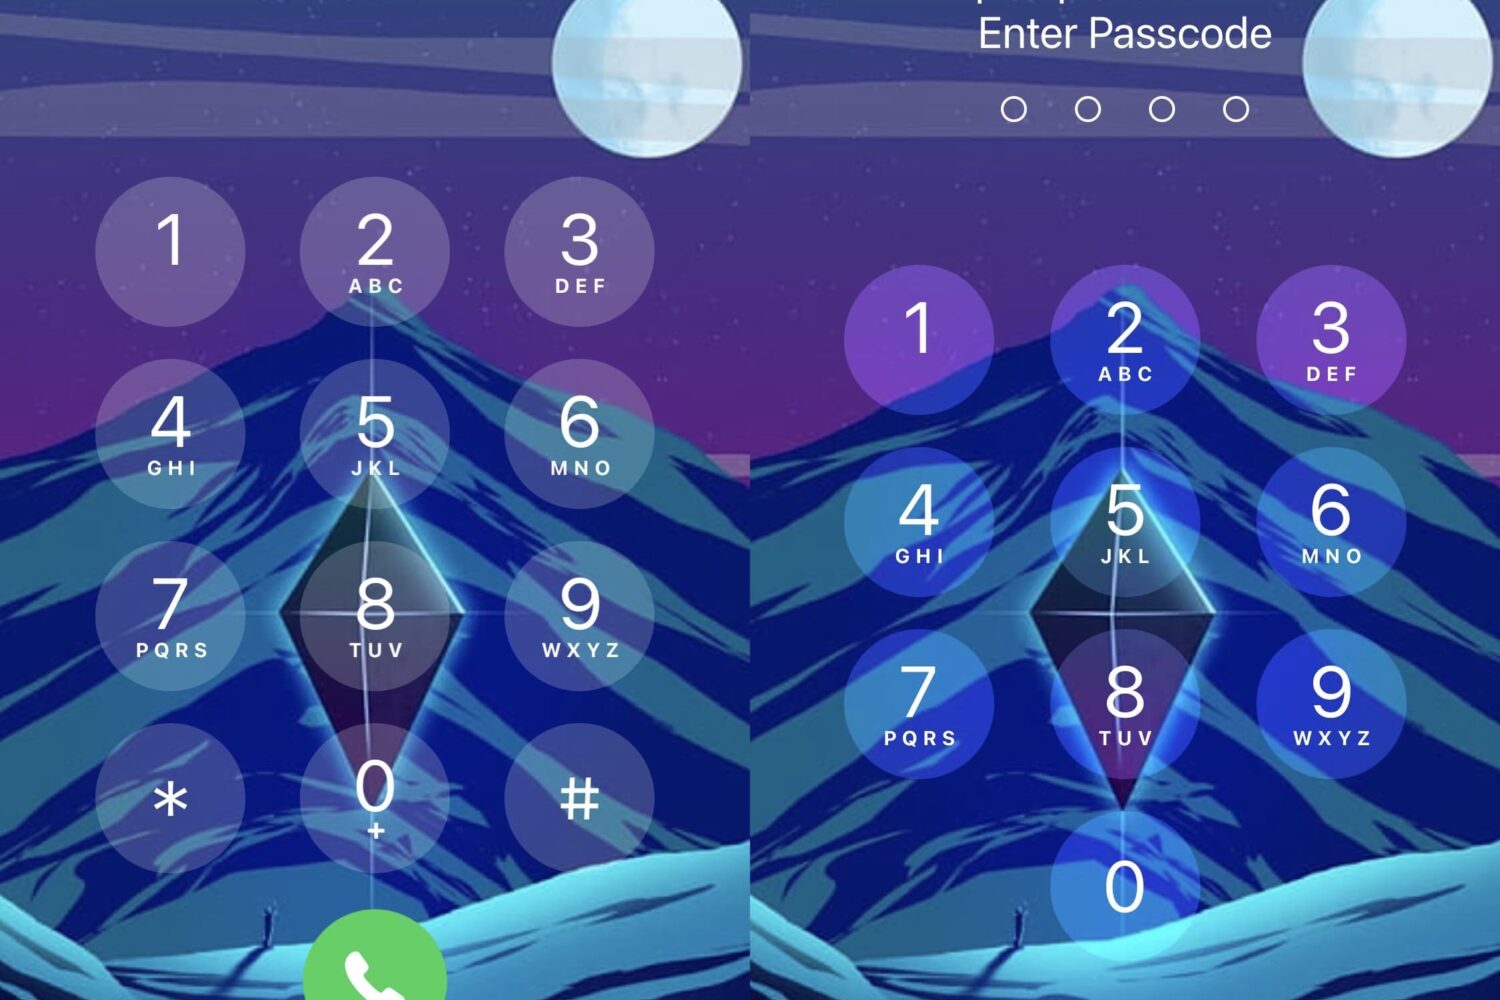 Marie custom backgrounds for passcode and dial pad.